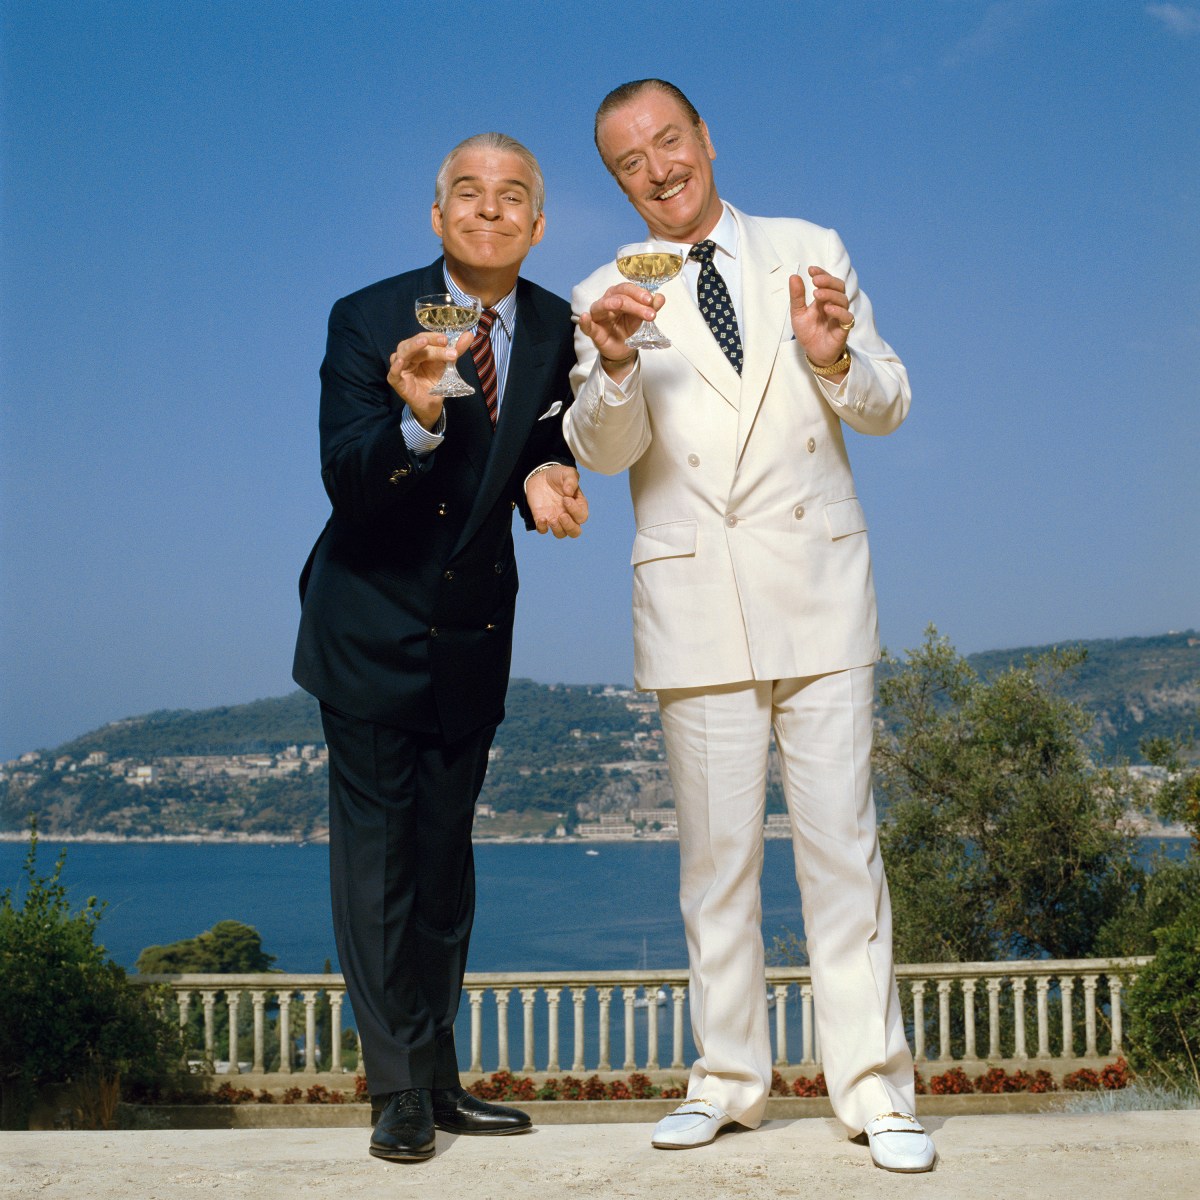 Michael Caine in "Dirty Rotten Scoundrels"